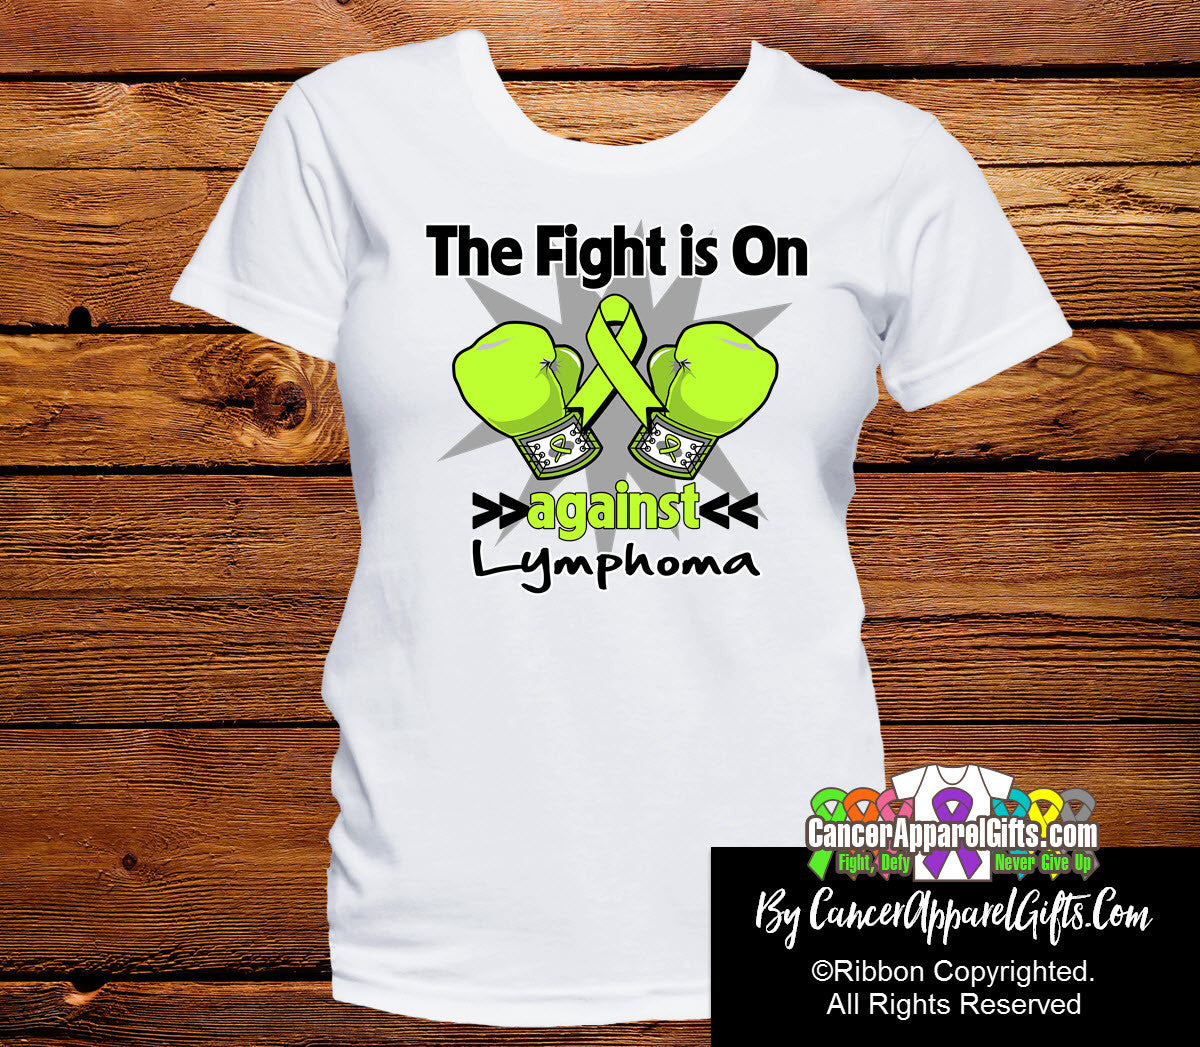 Lymphoma The Fight is On Ladies Shirts